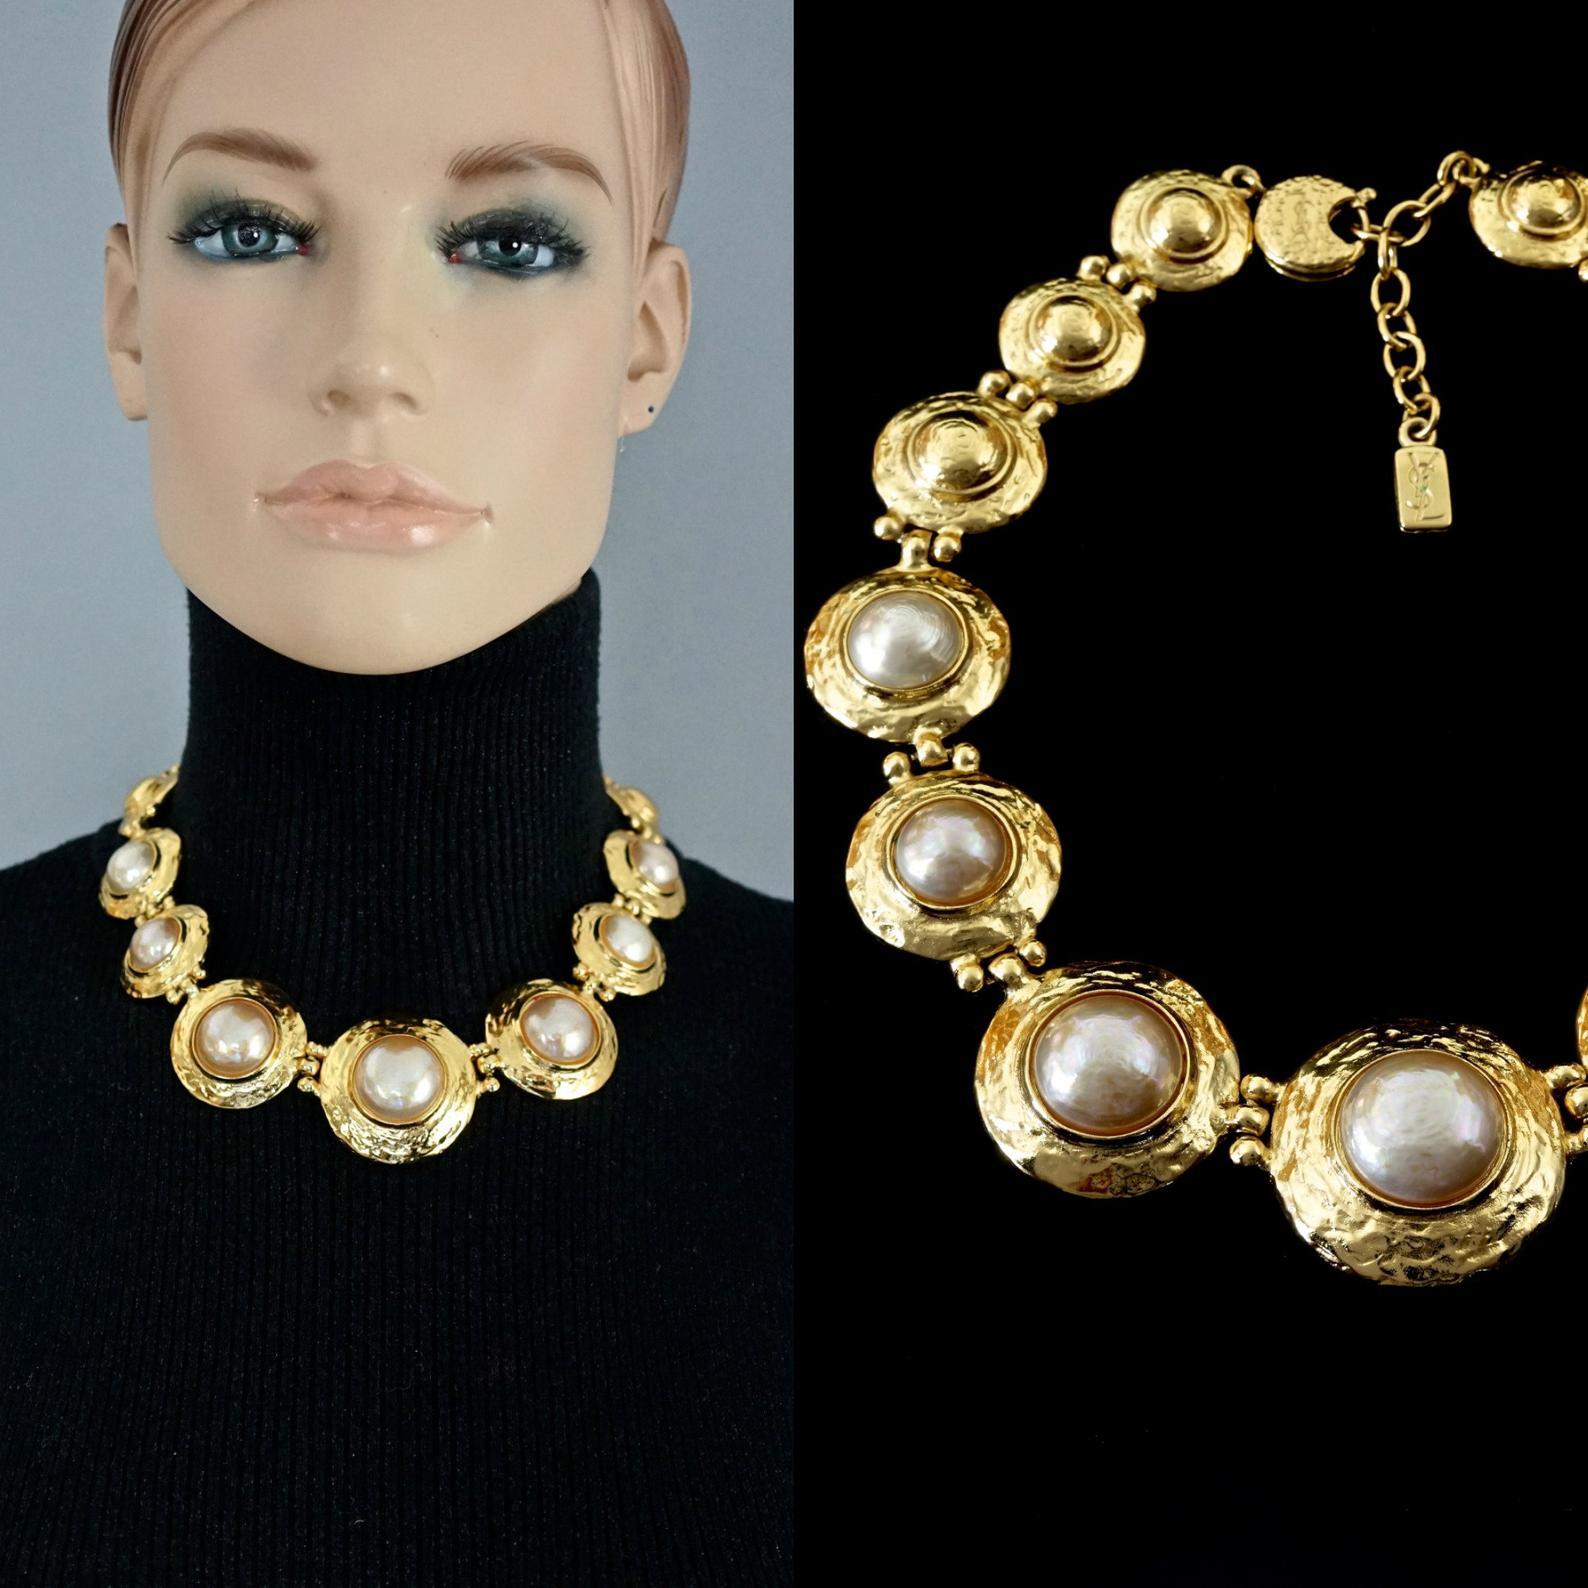 Vintage YVES SAINT LAURENT Ysl Pearl Textured Disc Choker Necklace

Measurements:
Big Disc: 1.57 inches (4 cm)
Small Disc: 0.86 inch (2.2 cm)
Wearable Length: 15 4/8 inches until 18 inches (45 cm to 49 cm)

Features:
- 100% Authentic YVES SAINT